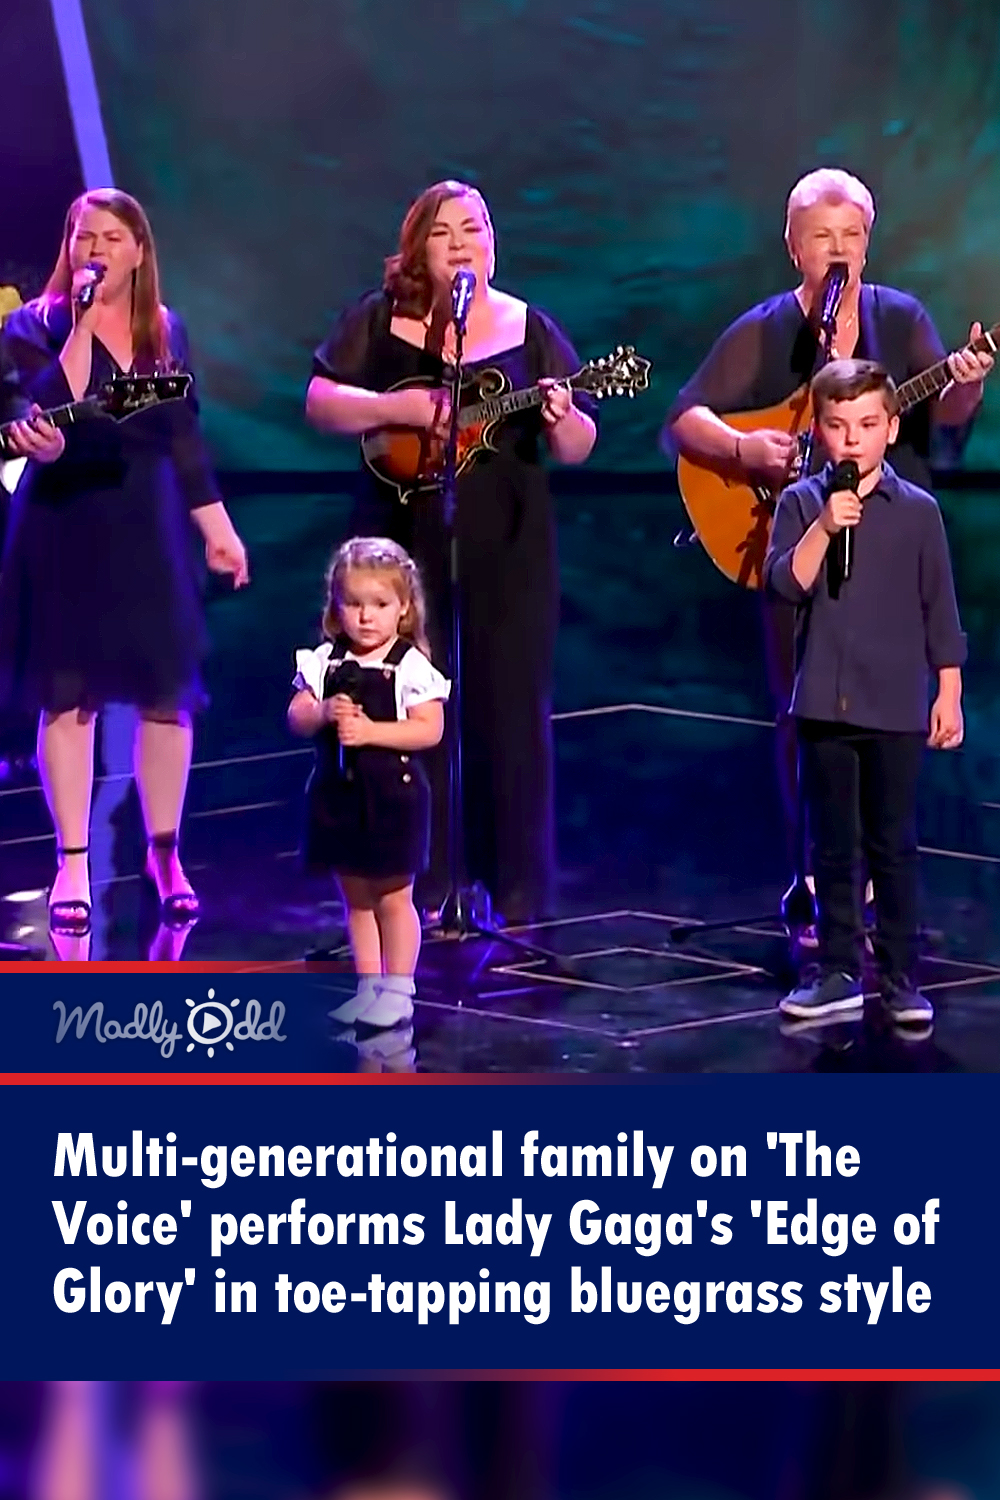 Multi-generational family delivers bluegrass version of ‘Edge of Glory’ on ‘The Voice Australia’